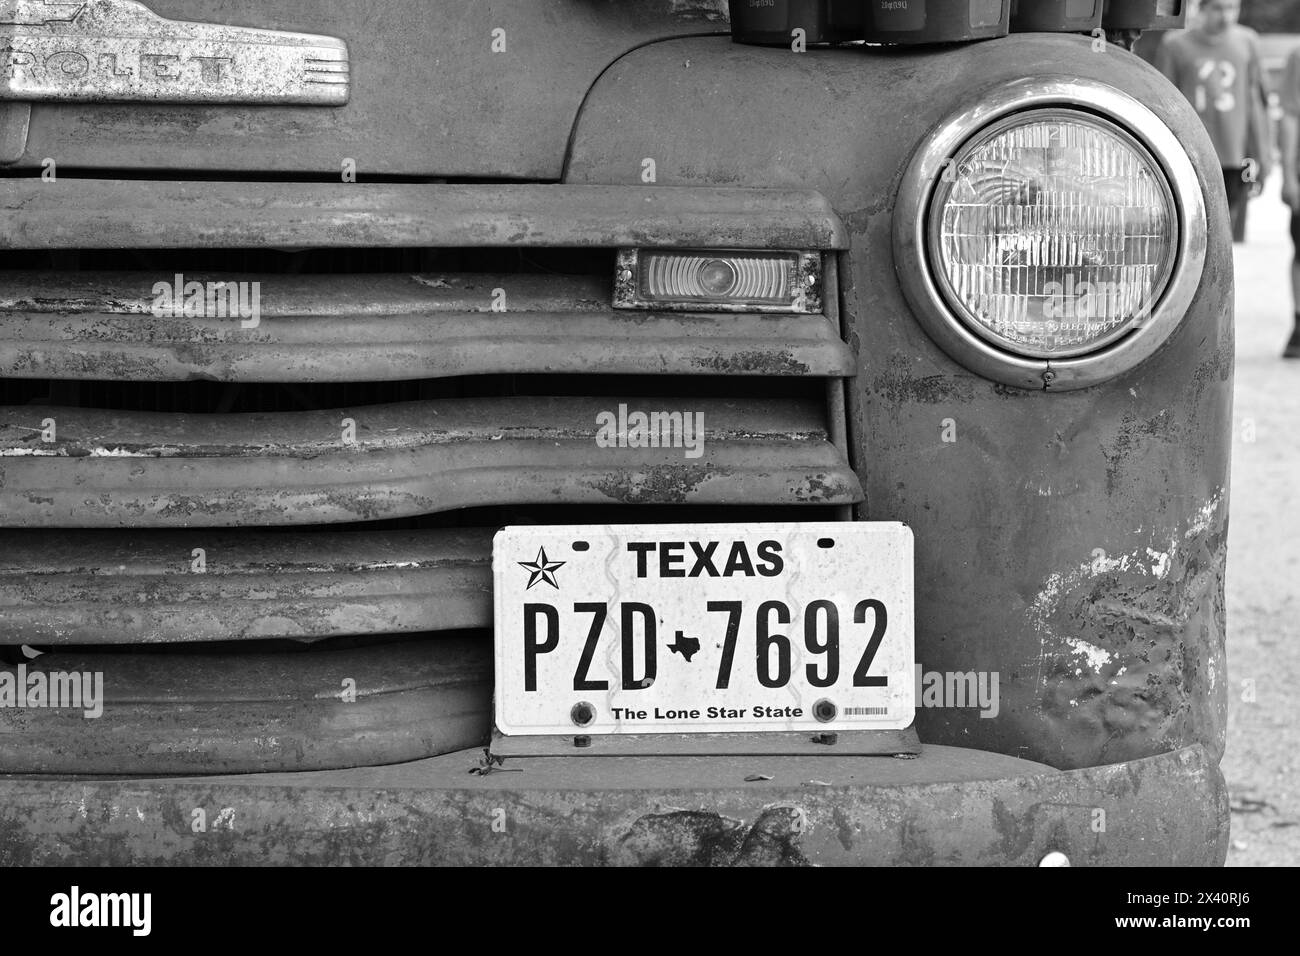 Vintage Chevrolet Pickup front grill with Texas tags in Black & White Stock Photo